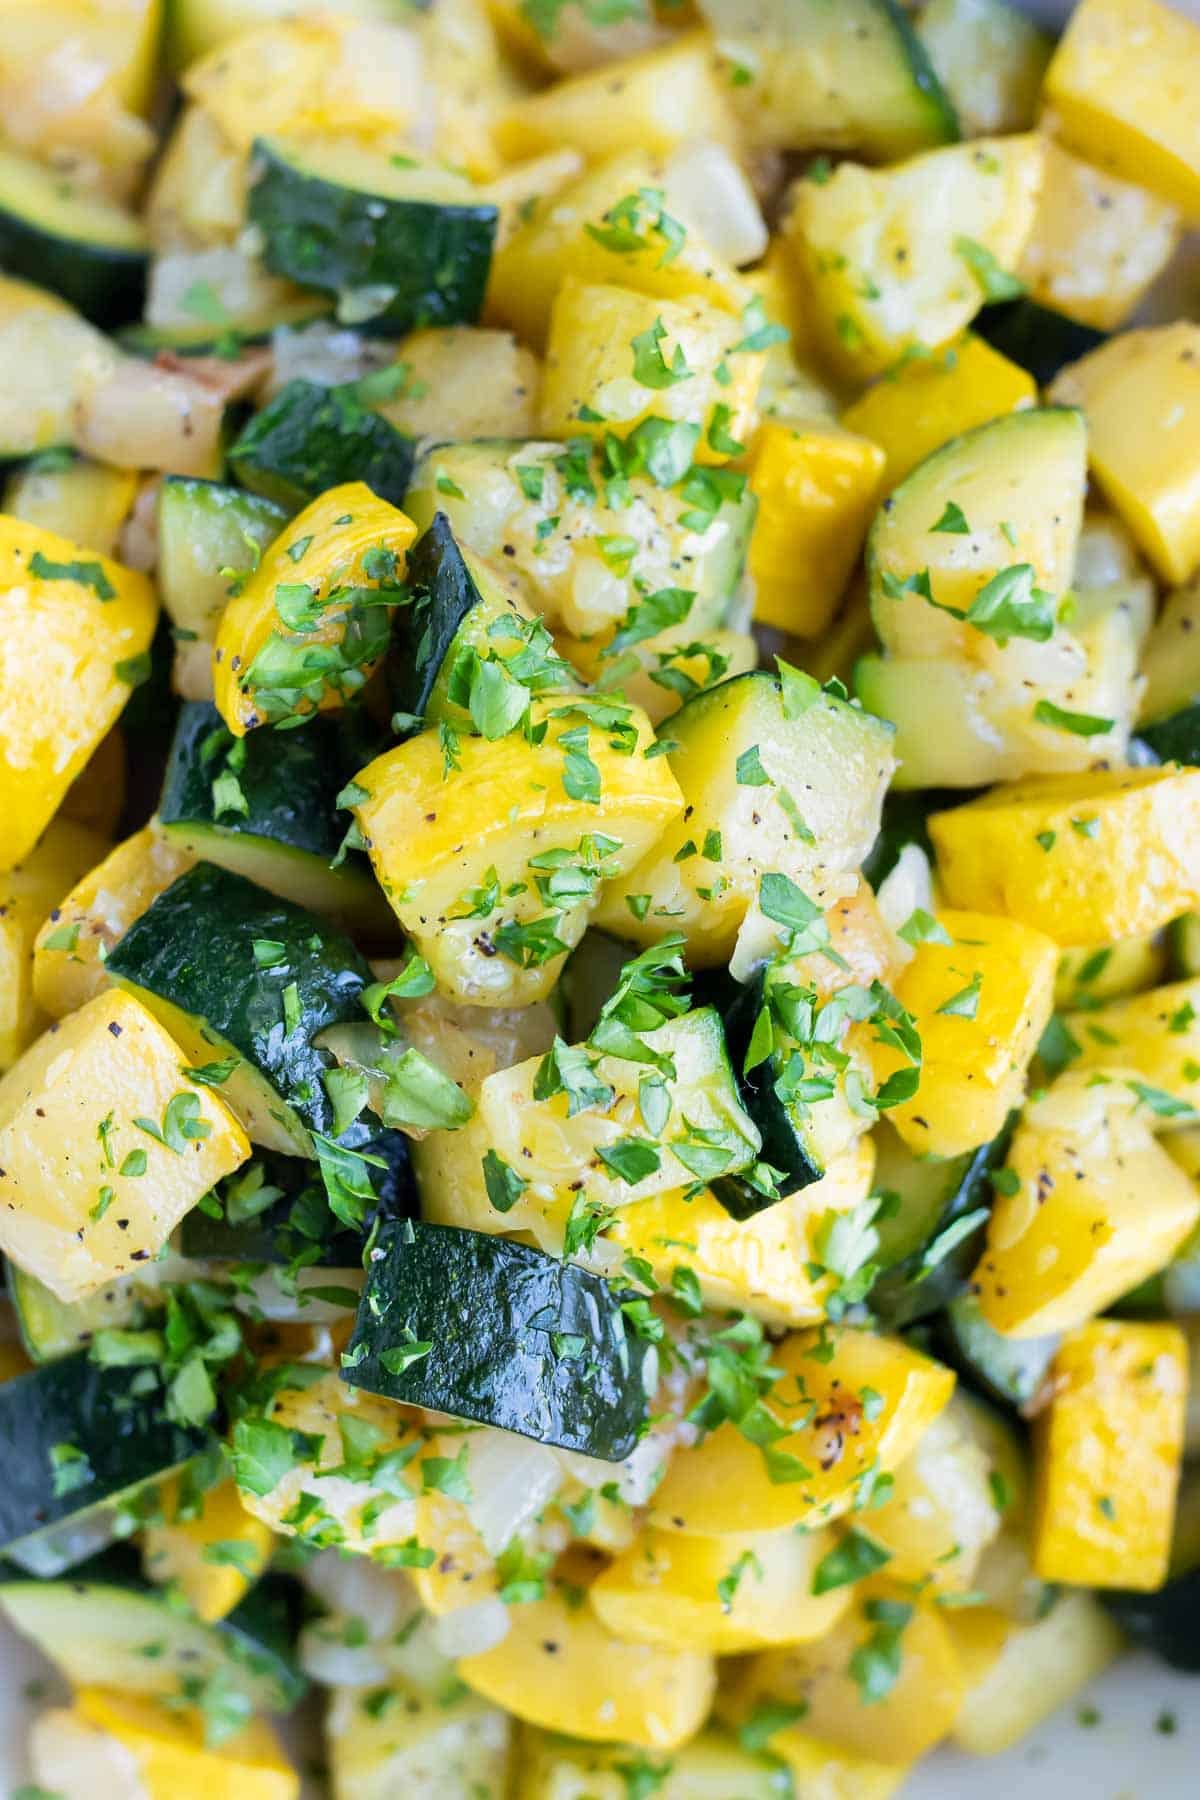 Yellow squash cubes and diced zucchini that have been cooked and sprinkled with parsley.